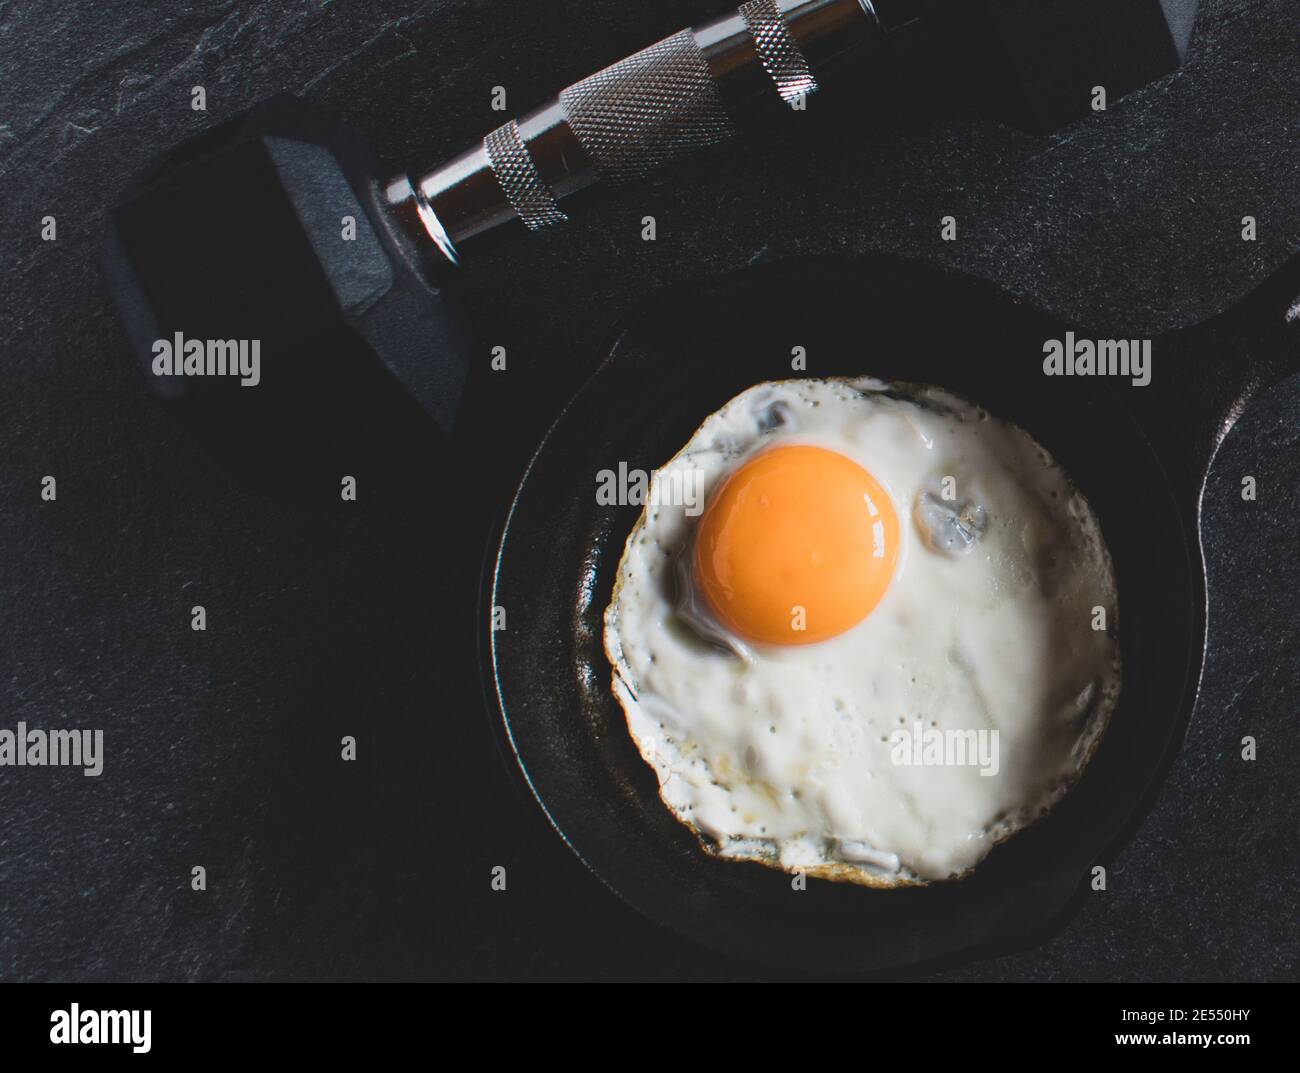 dumbbell with pan fried egg in a pan on dark bakground from above Stock Photo